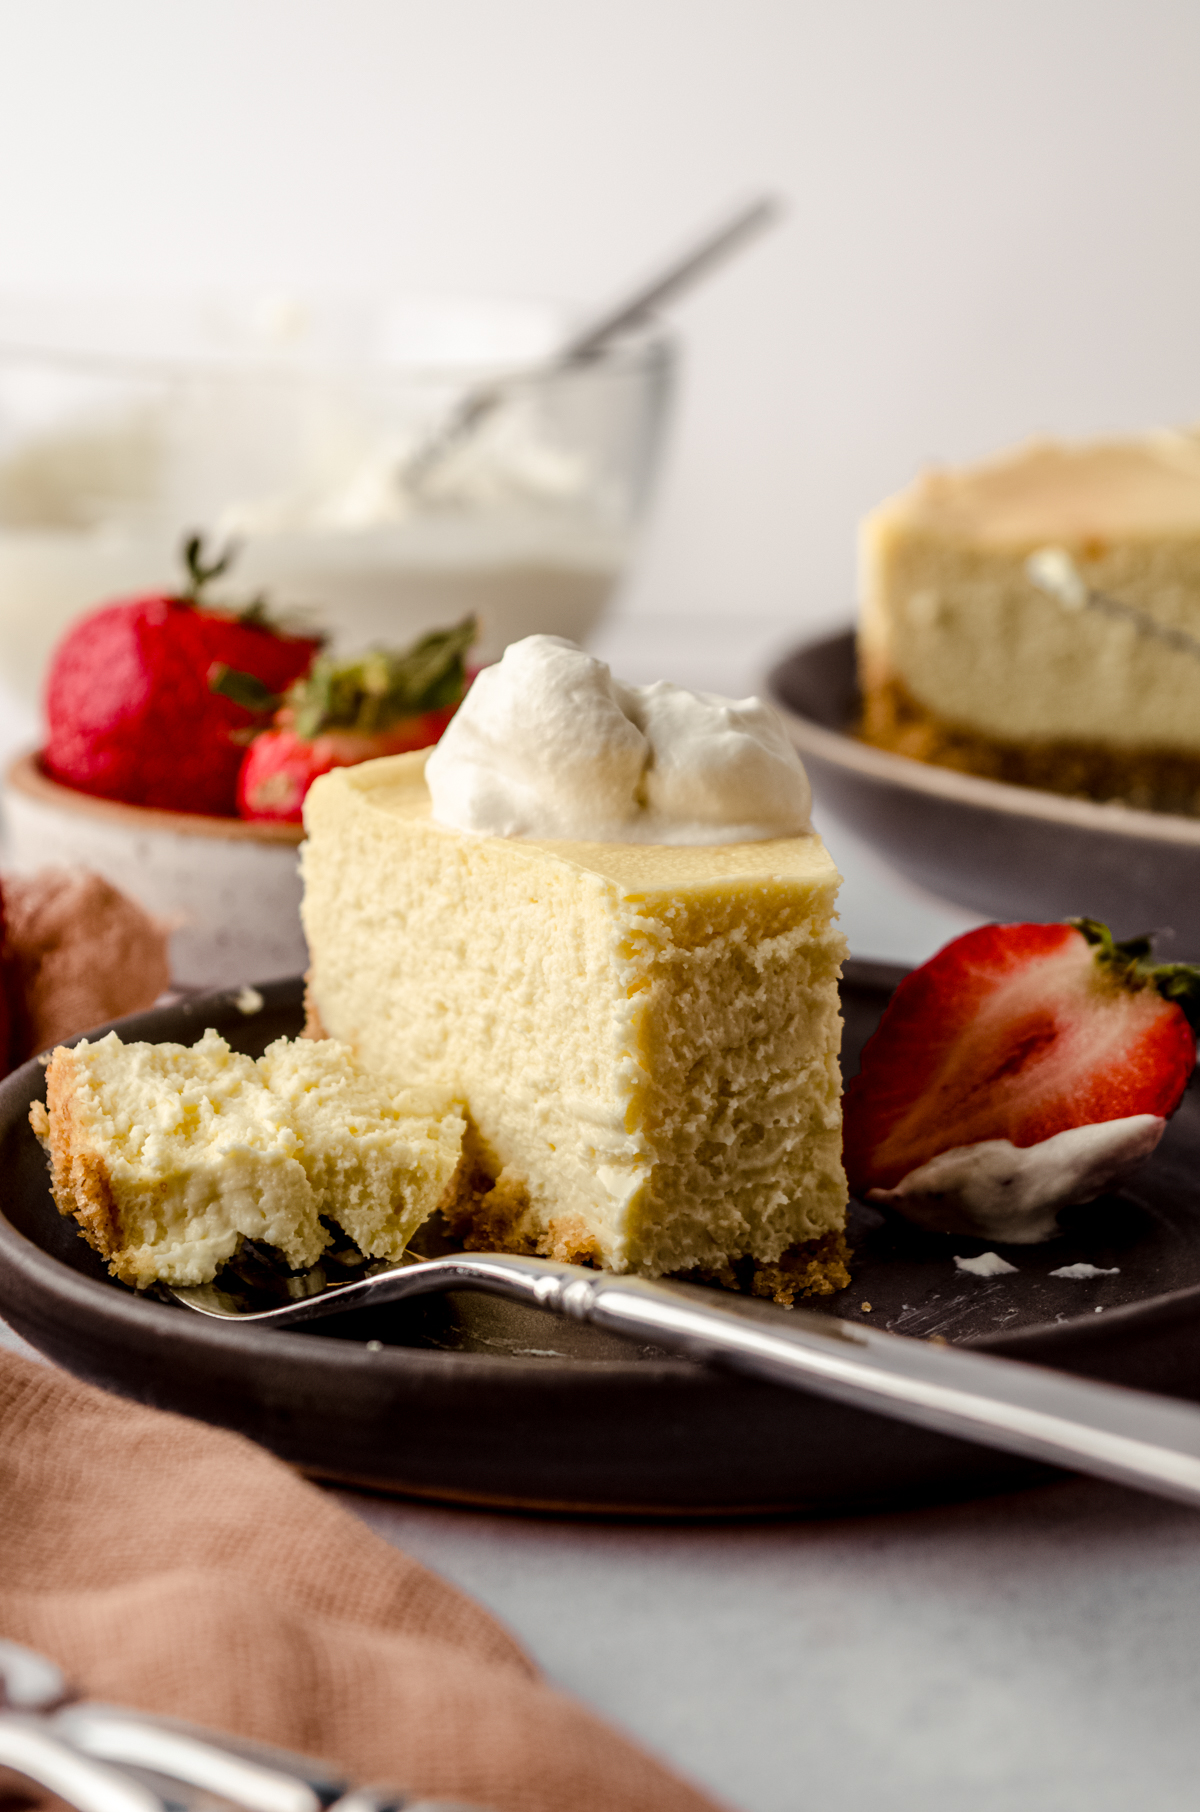 A slice of classic cheesecake with whipped cream on a plate. Someone has taken a bite from the cheesecake with a fork.